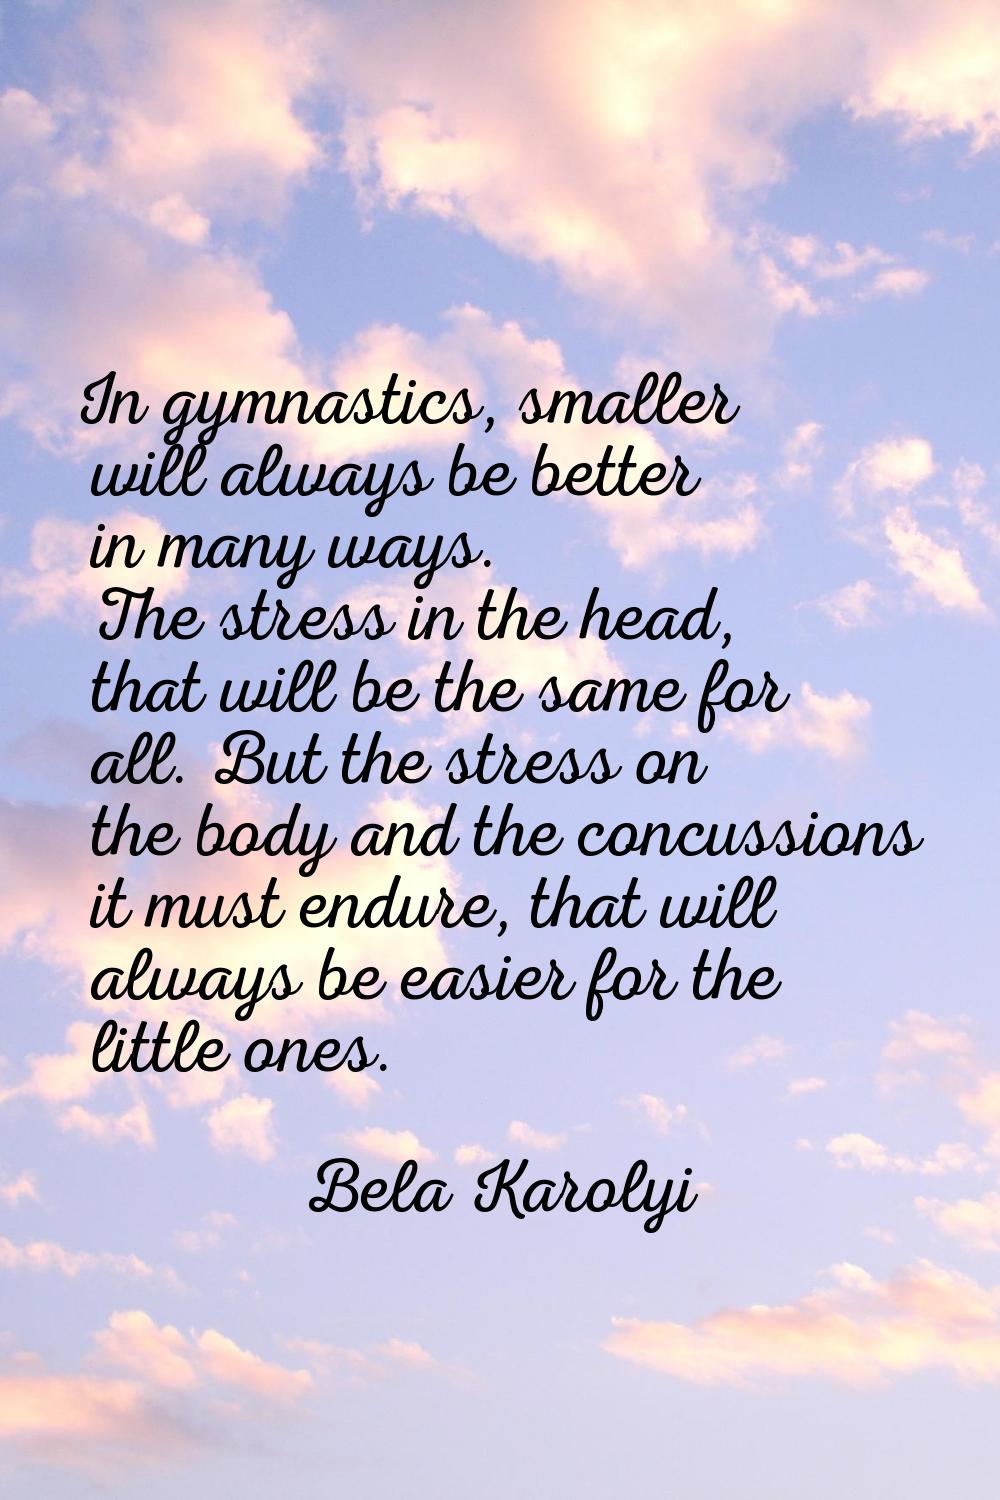 In gymnastics, smaller will always be better in many ways. The stress in the head, that will be the